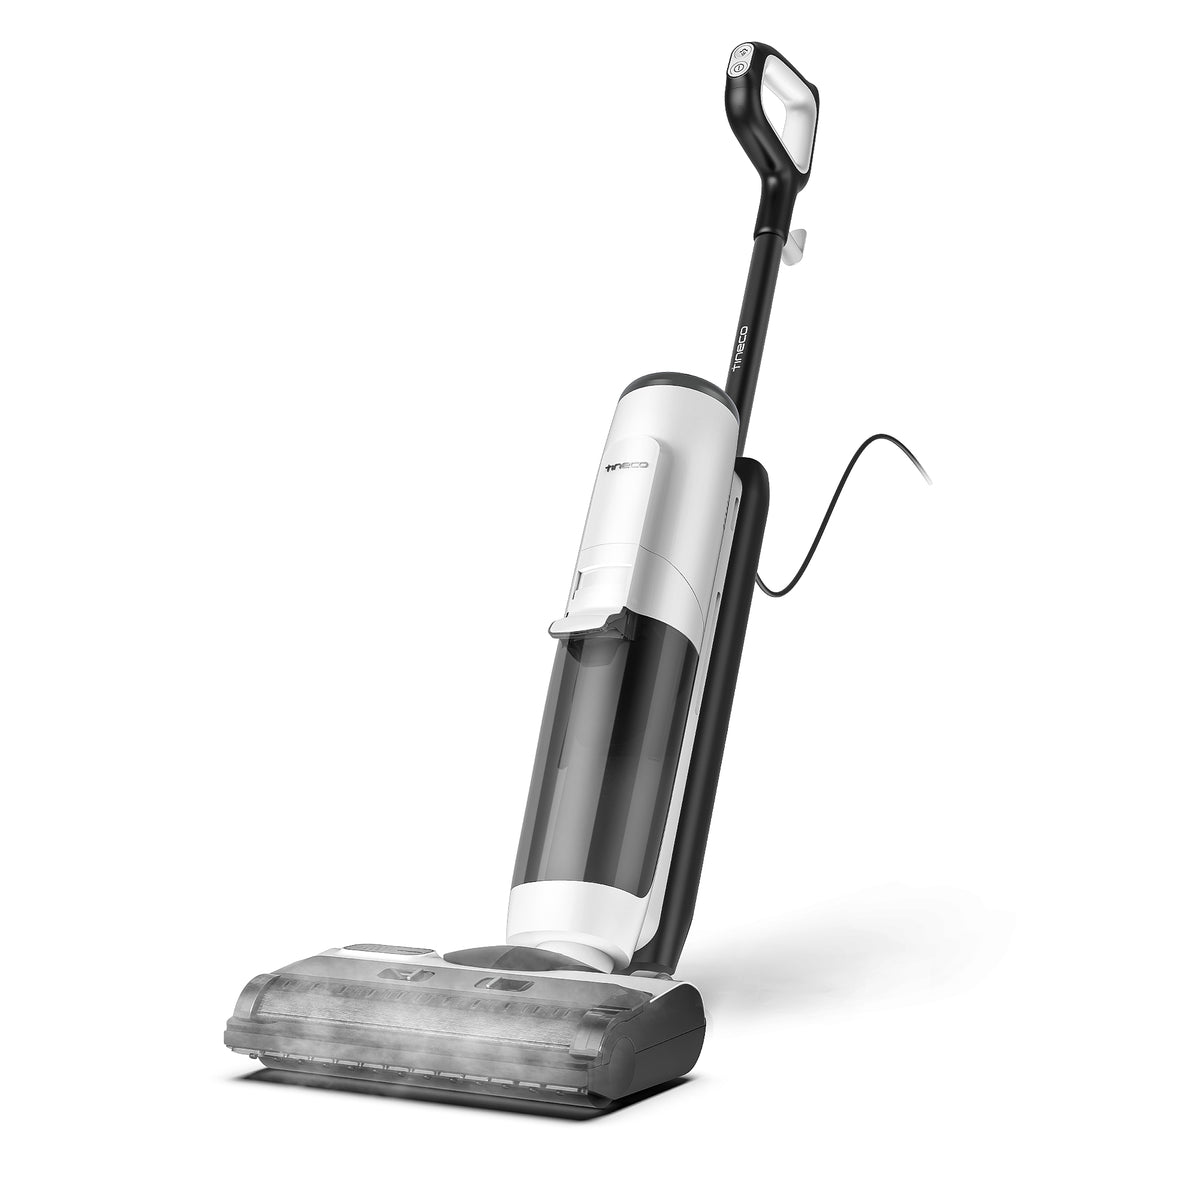 5 Best Steam Mop for Vinyl Floors in 2023, Tested and Reviewed